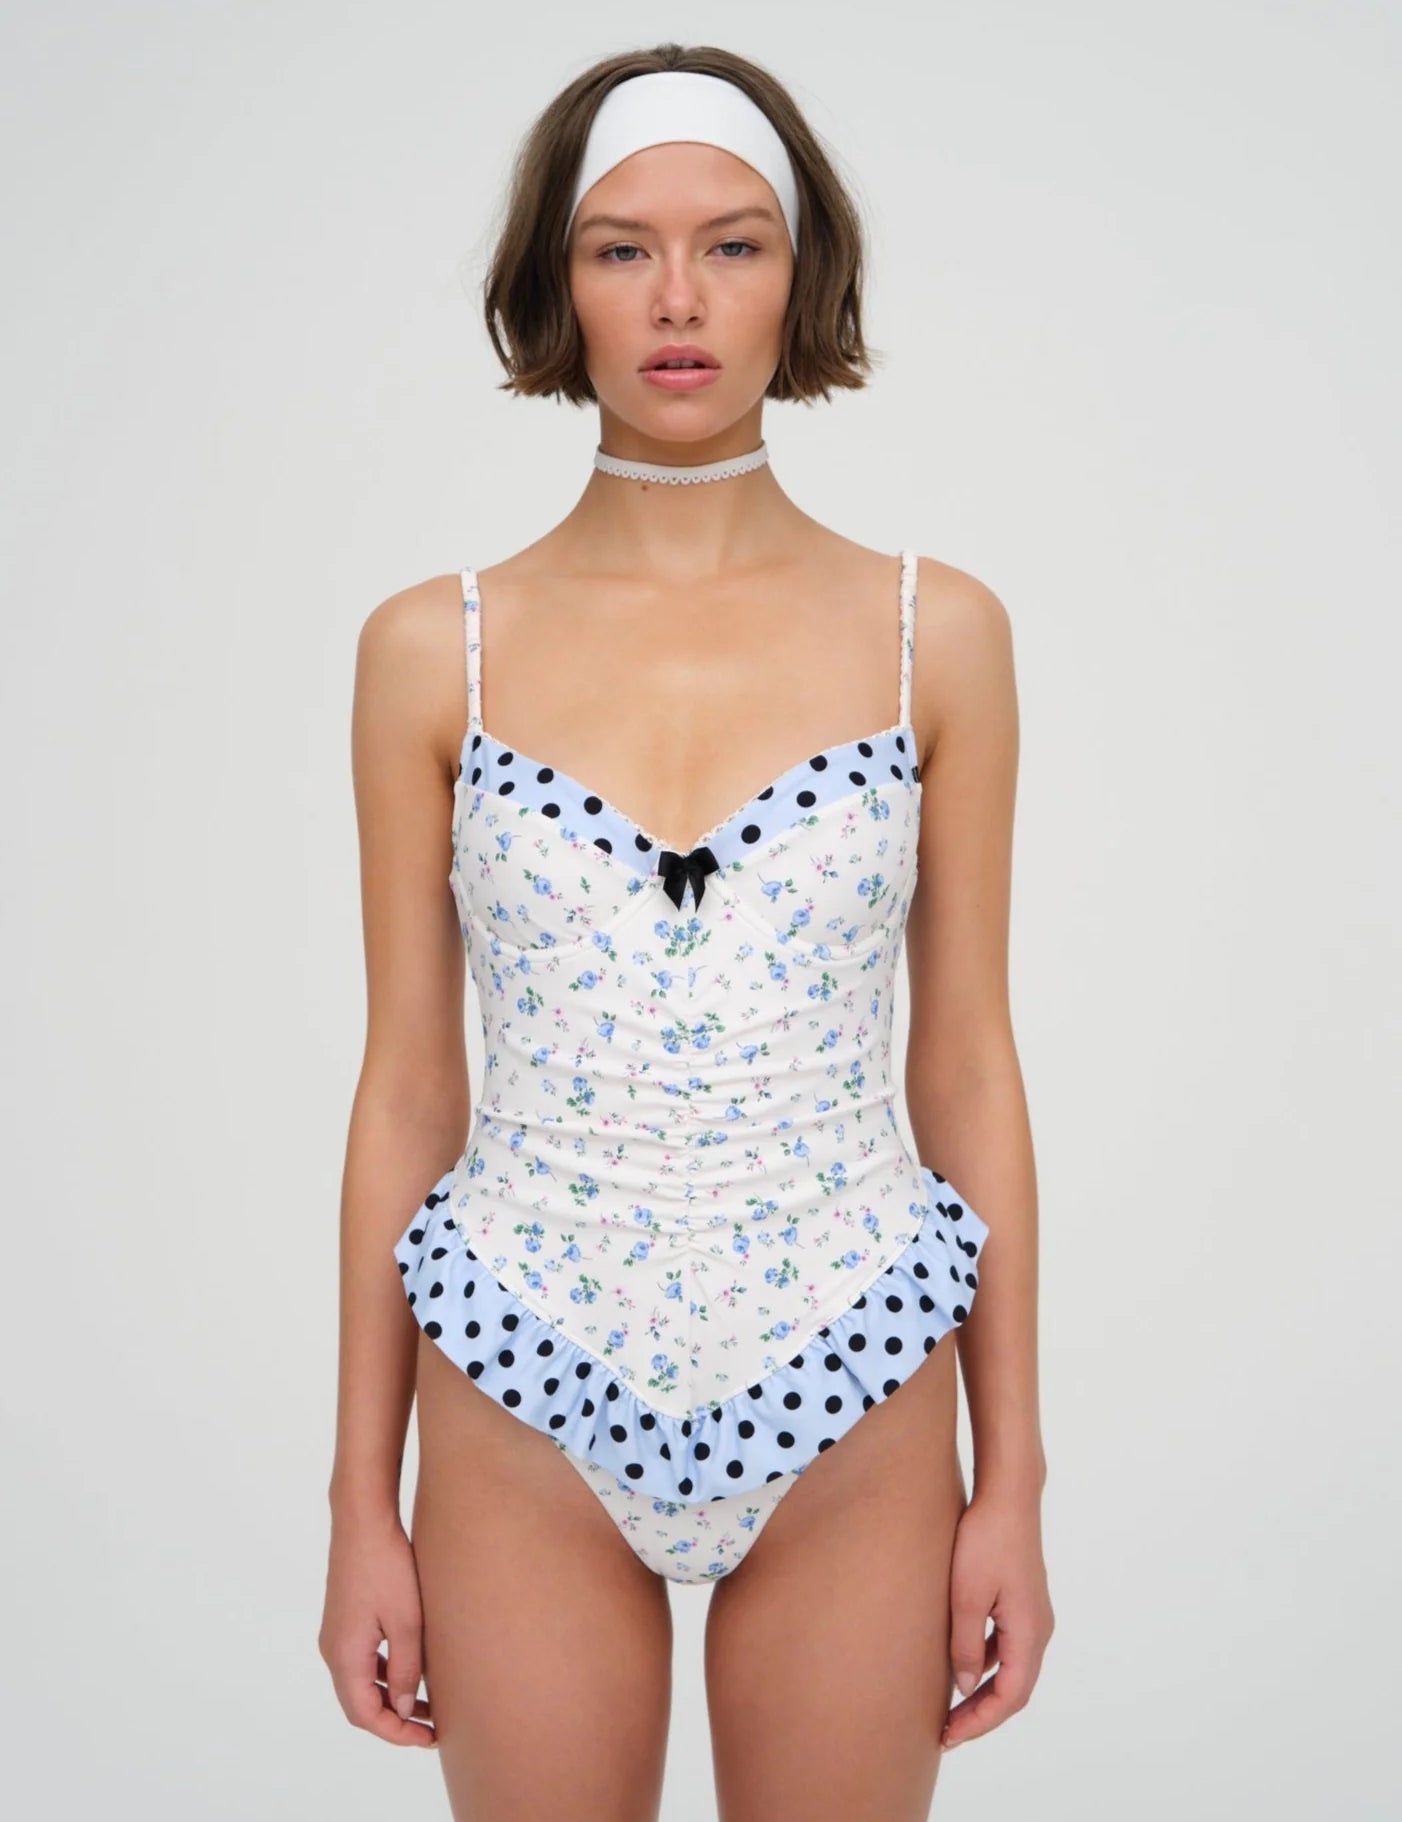 Muna One Piece Swimsuit - White Multi [For Love and Lemons]